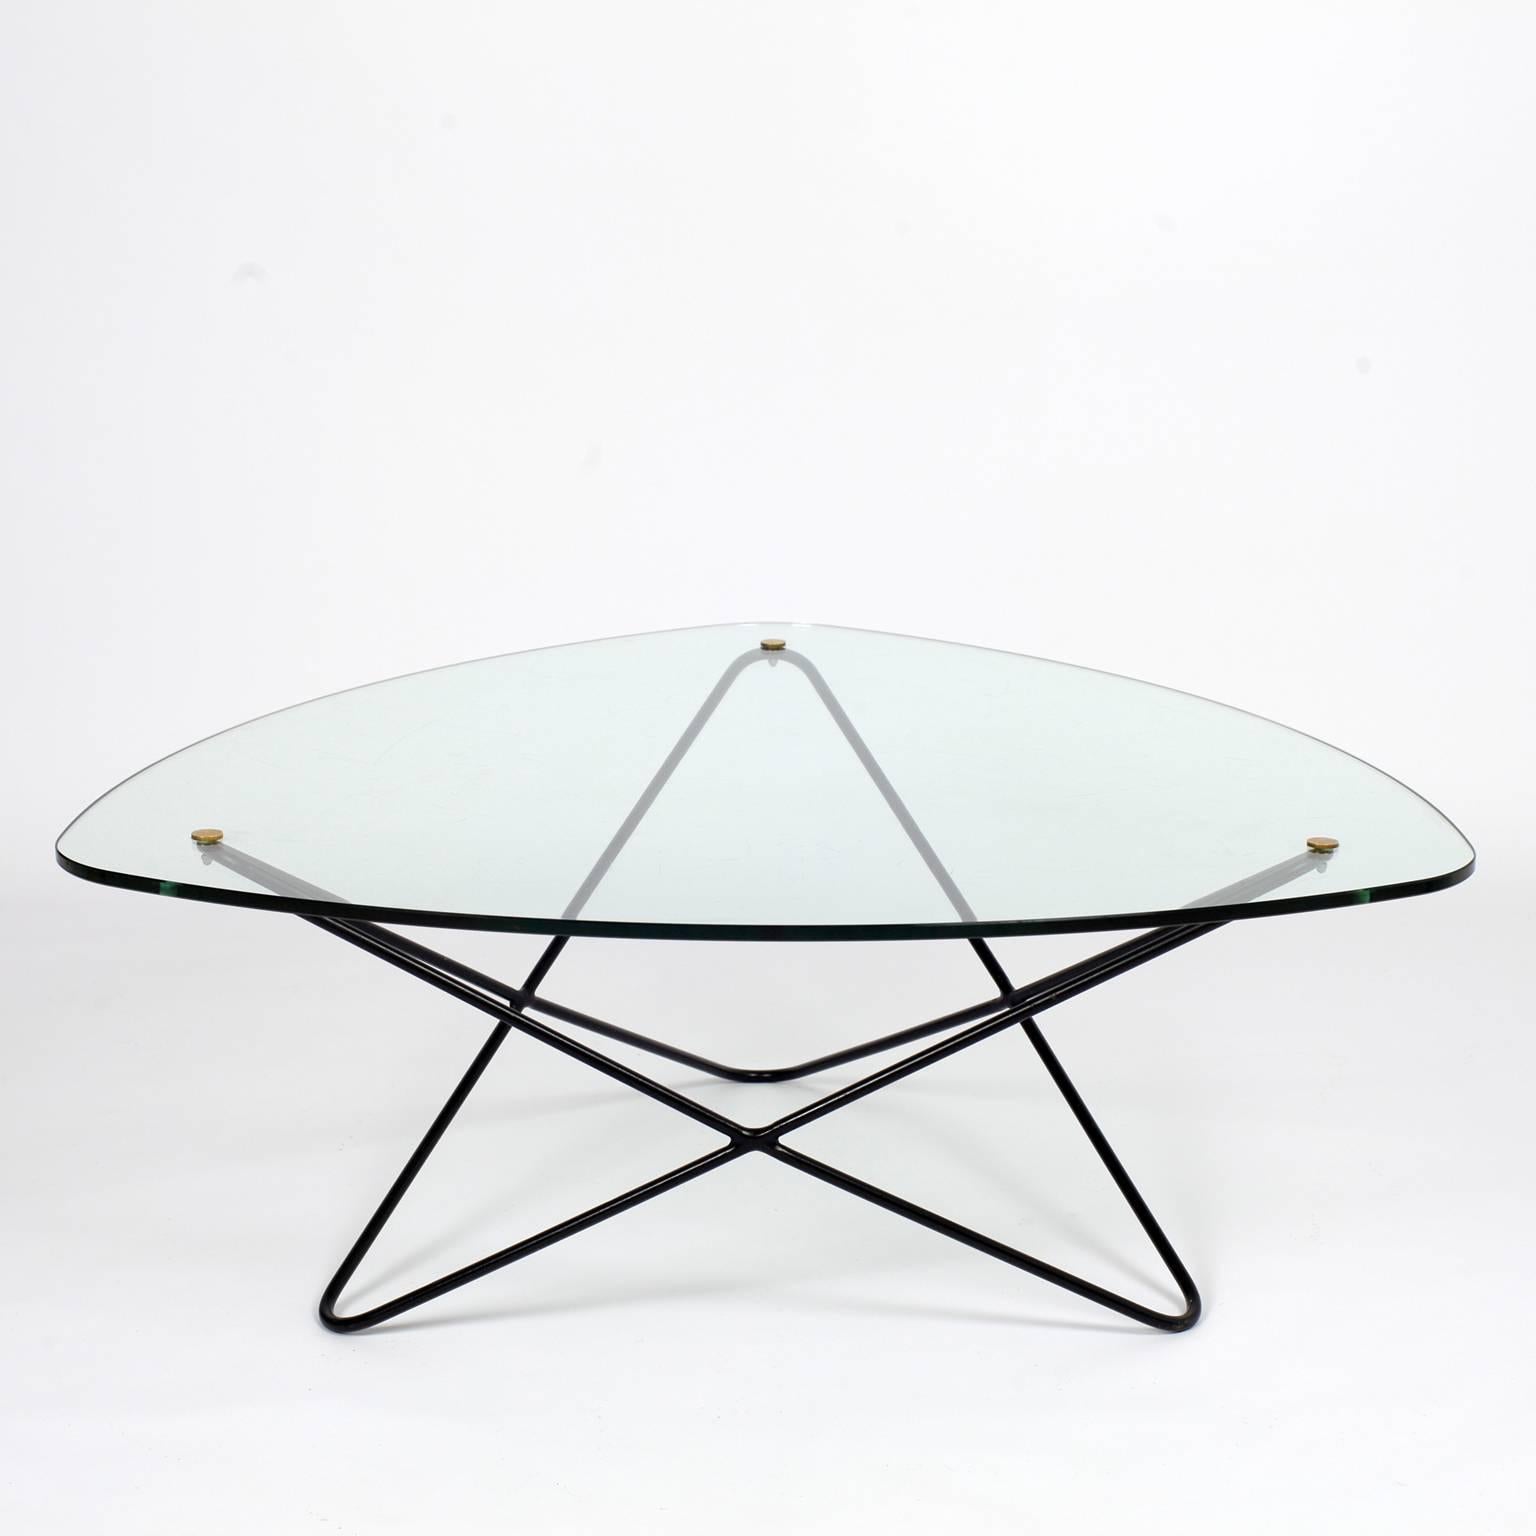 Delicate and airy coffee table named Jasmin designed by Florent Lasbleiz for Airbone, circa 1952.
Glass top and blak enameled steel structure with brass details.
Very good condition with tiny scratches on the glass top.